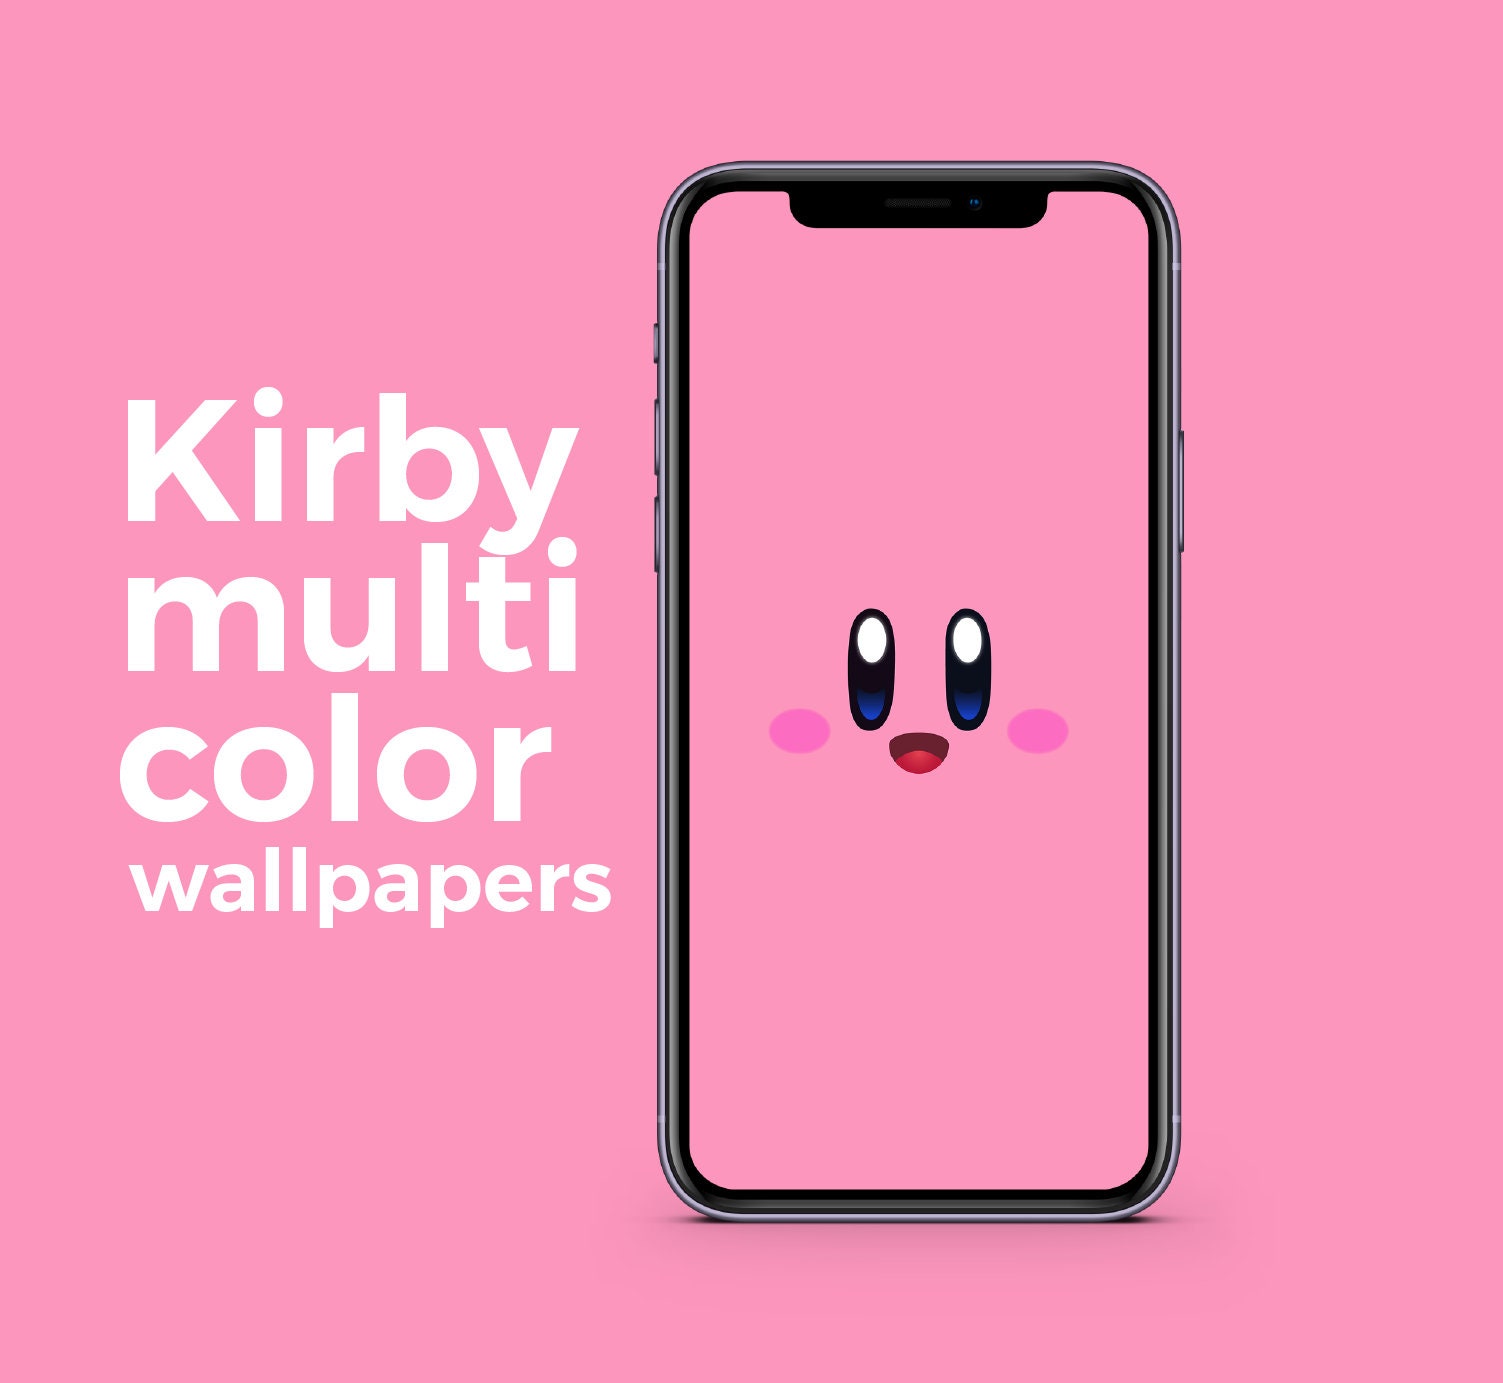 Here is a official Kirby wallpaper from the Nintendo site : r/Kirby